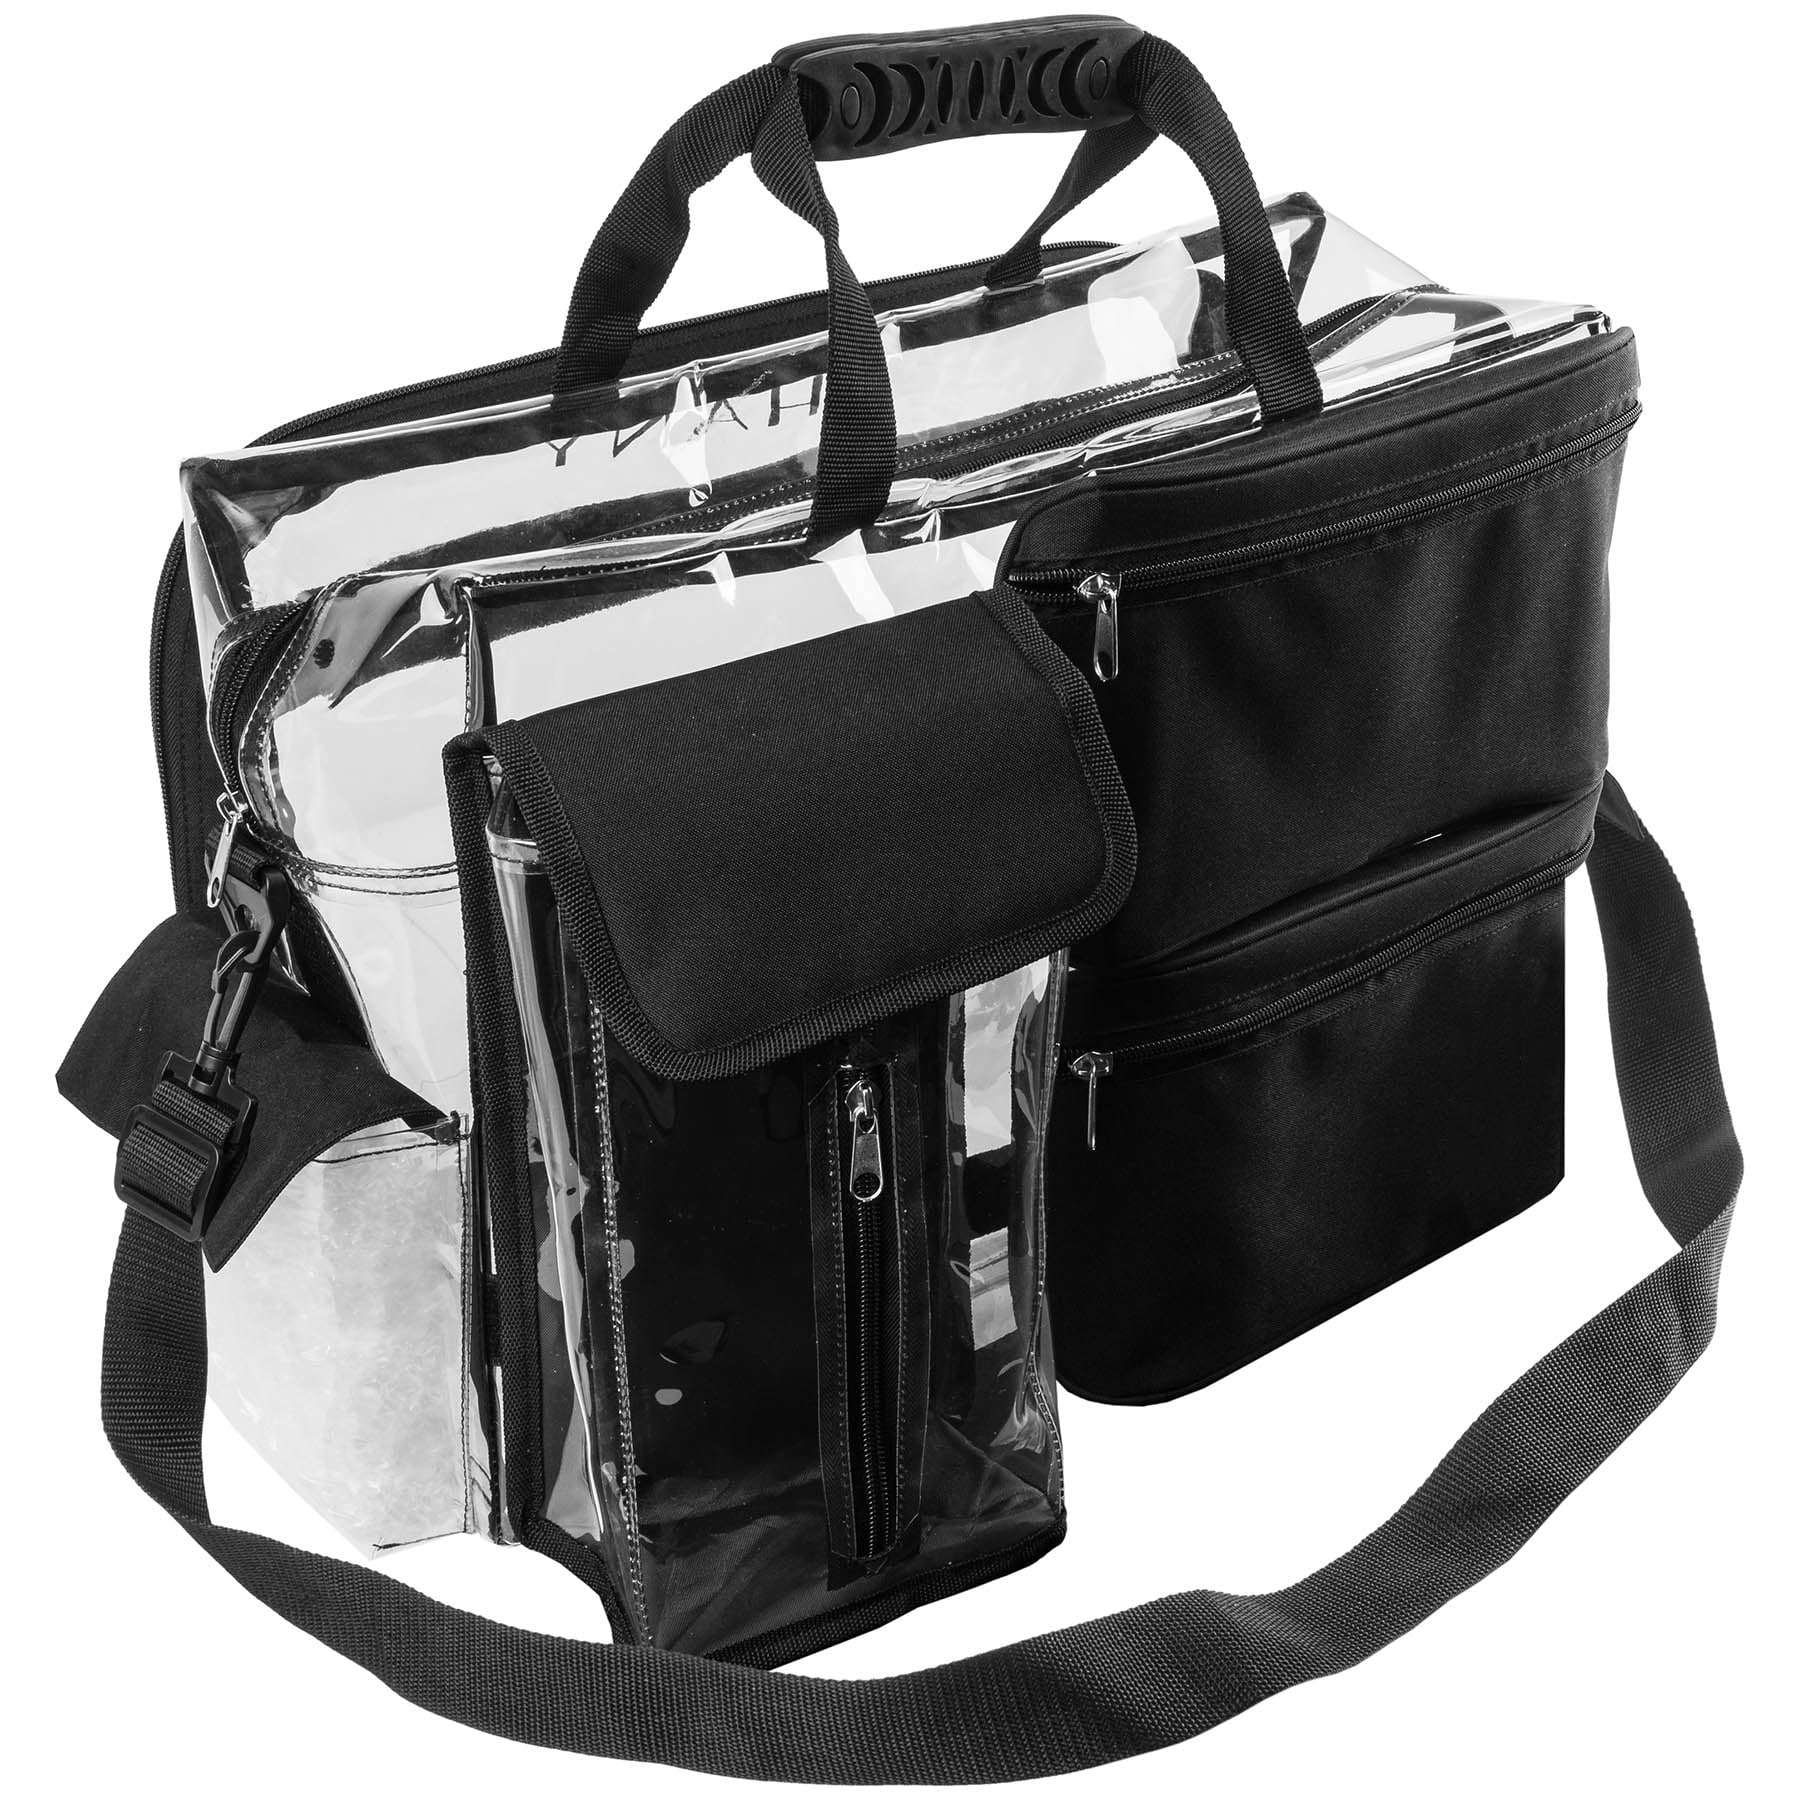 SHANY Travel Makeup Artist Bag with Removable Compartments – Clear Tote bag with Detachable ...